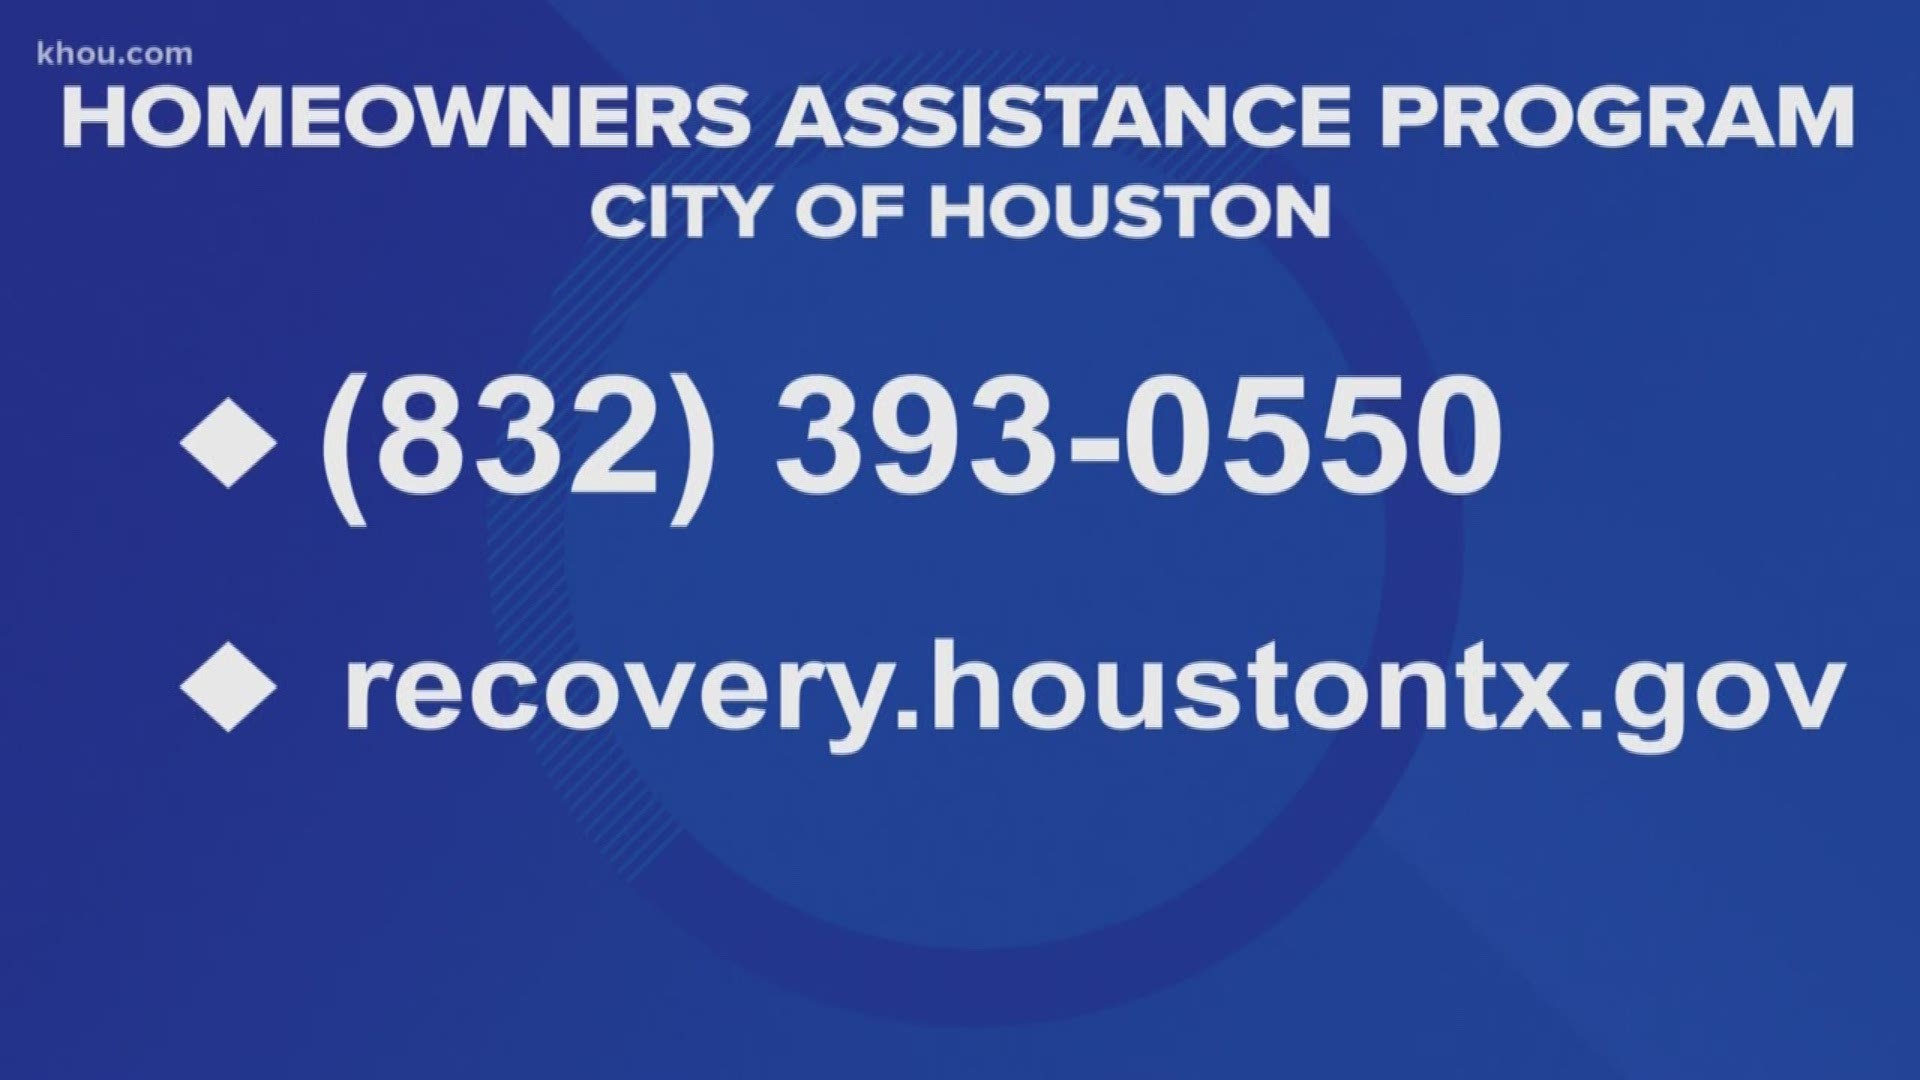 There's a lot of money still up for grabs  if you're paying for hurricane damage in the City of Houston and you don't need receipts to get your hands on that money.